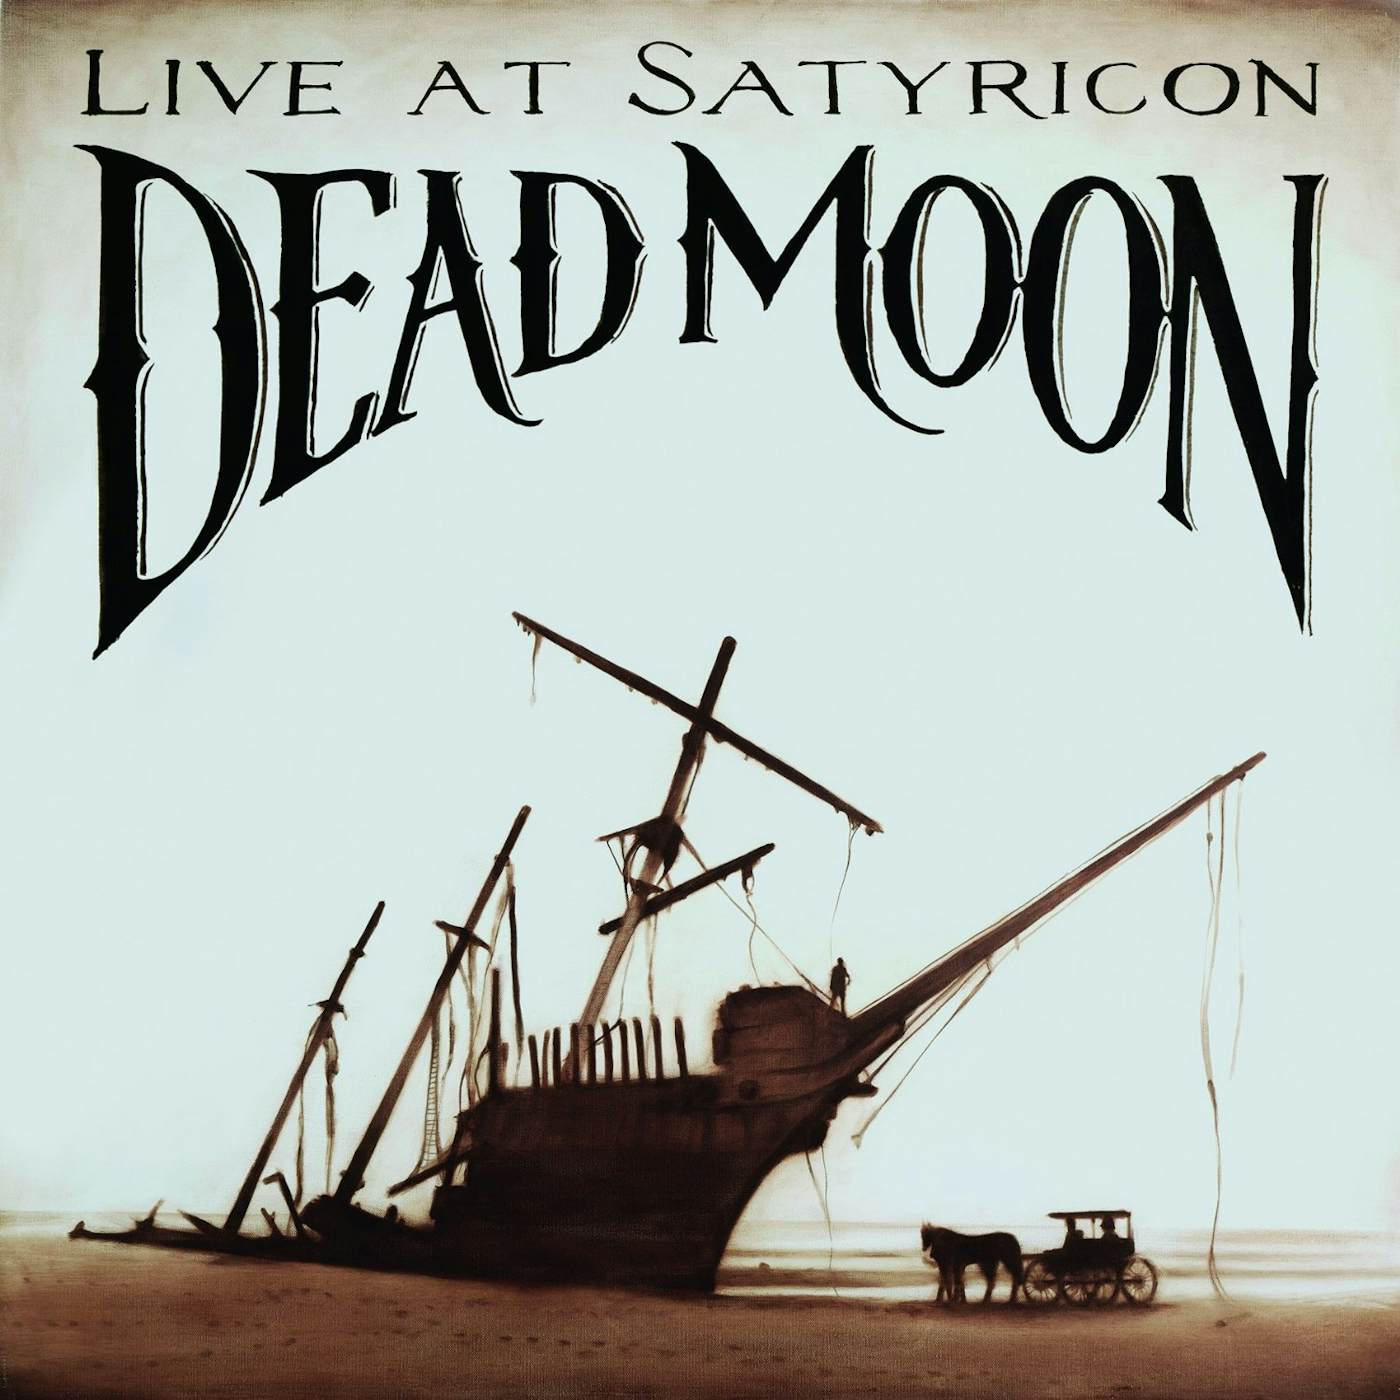 Dead Moon TALES FROM THE GREASE TRAP 1: LIVE AT SATYRICON Vinyl Record